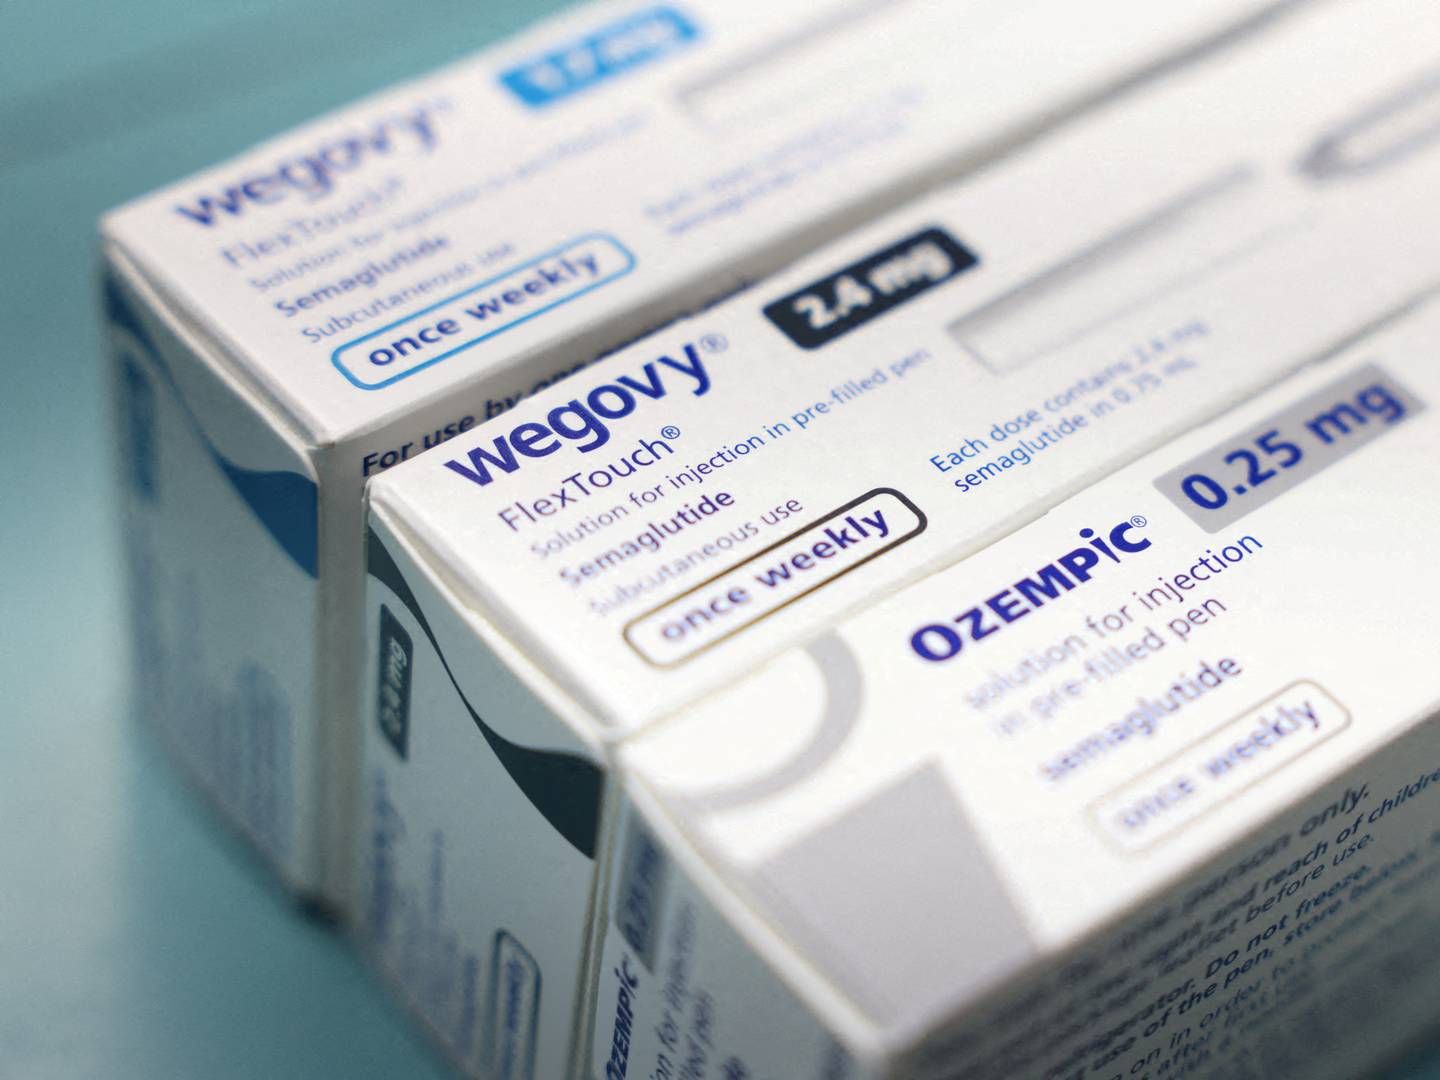 The price of obesity drugs like Wegovy should be set so that patients with the necessary medical need have access to it, according to a former top scientist at the company - just as the industry has worked to do with insulin. | Foto: Hollie Adams